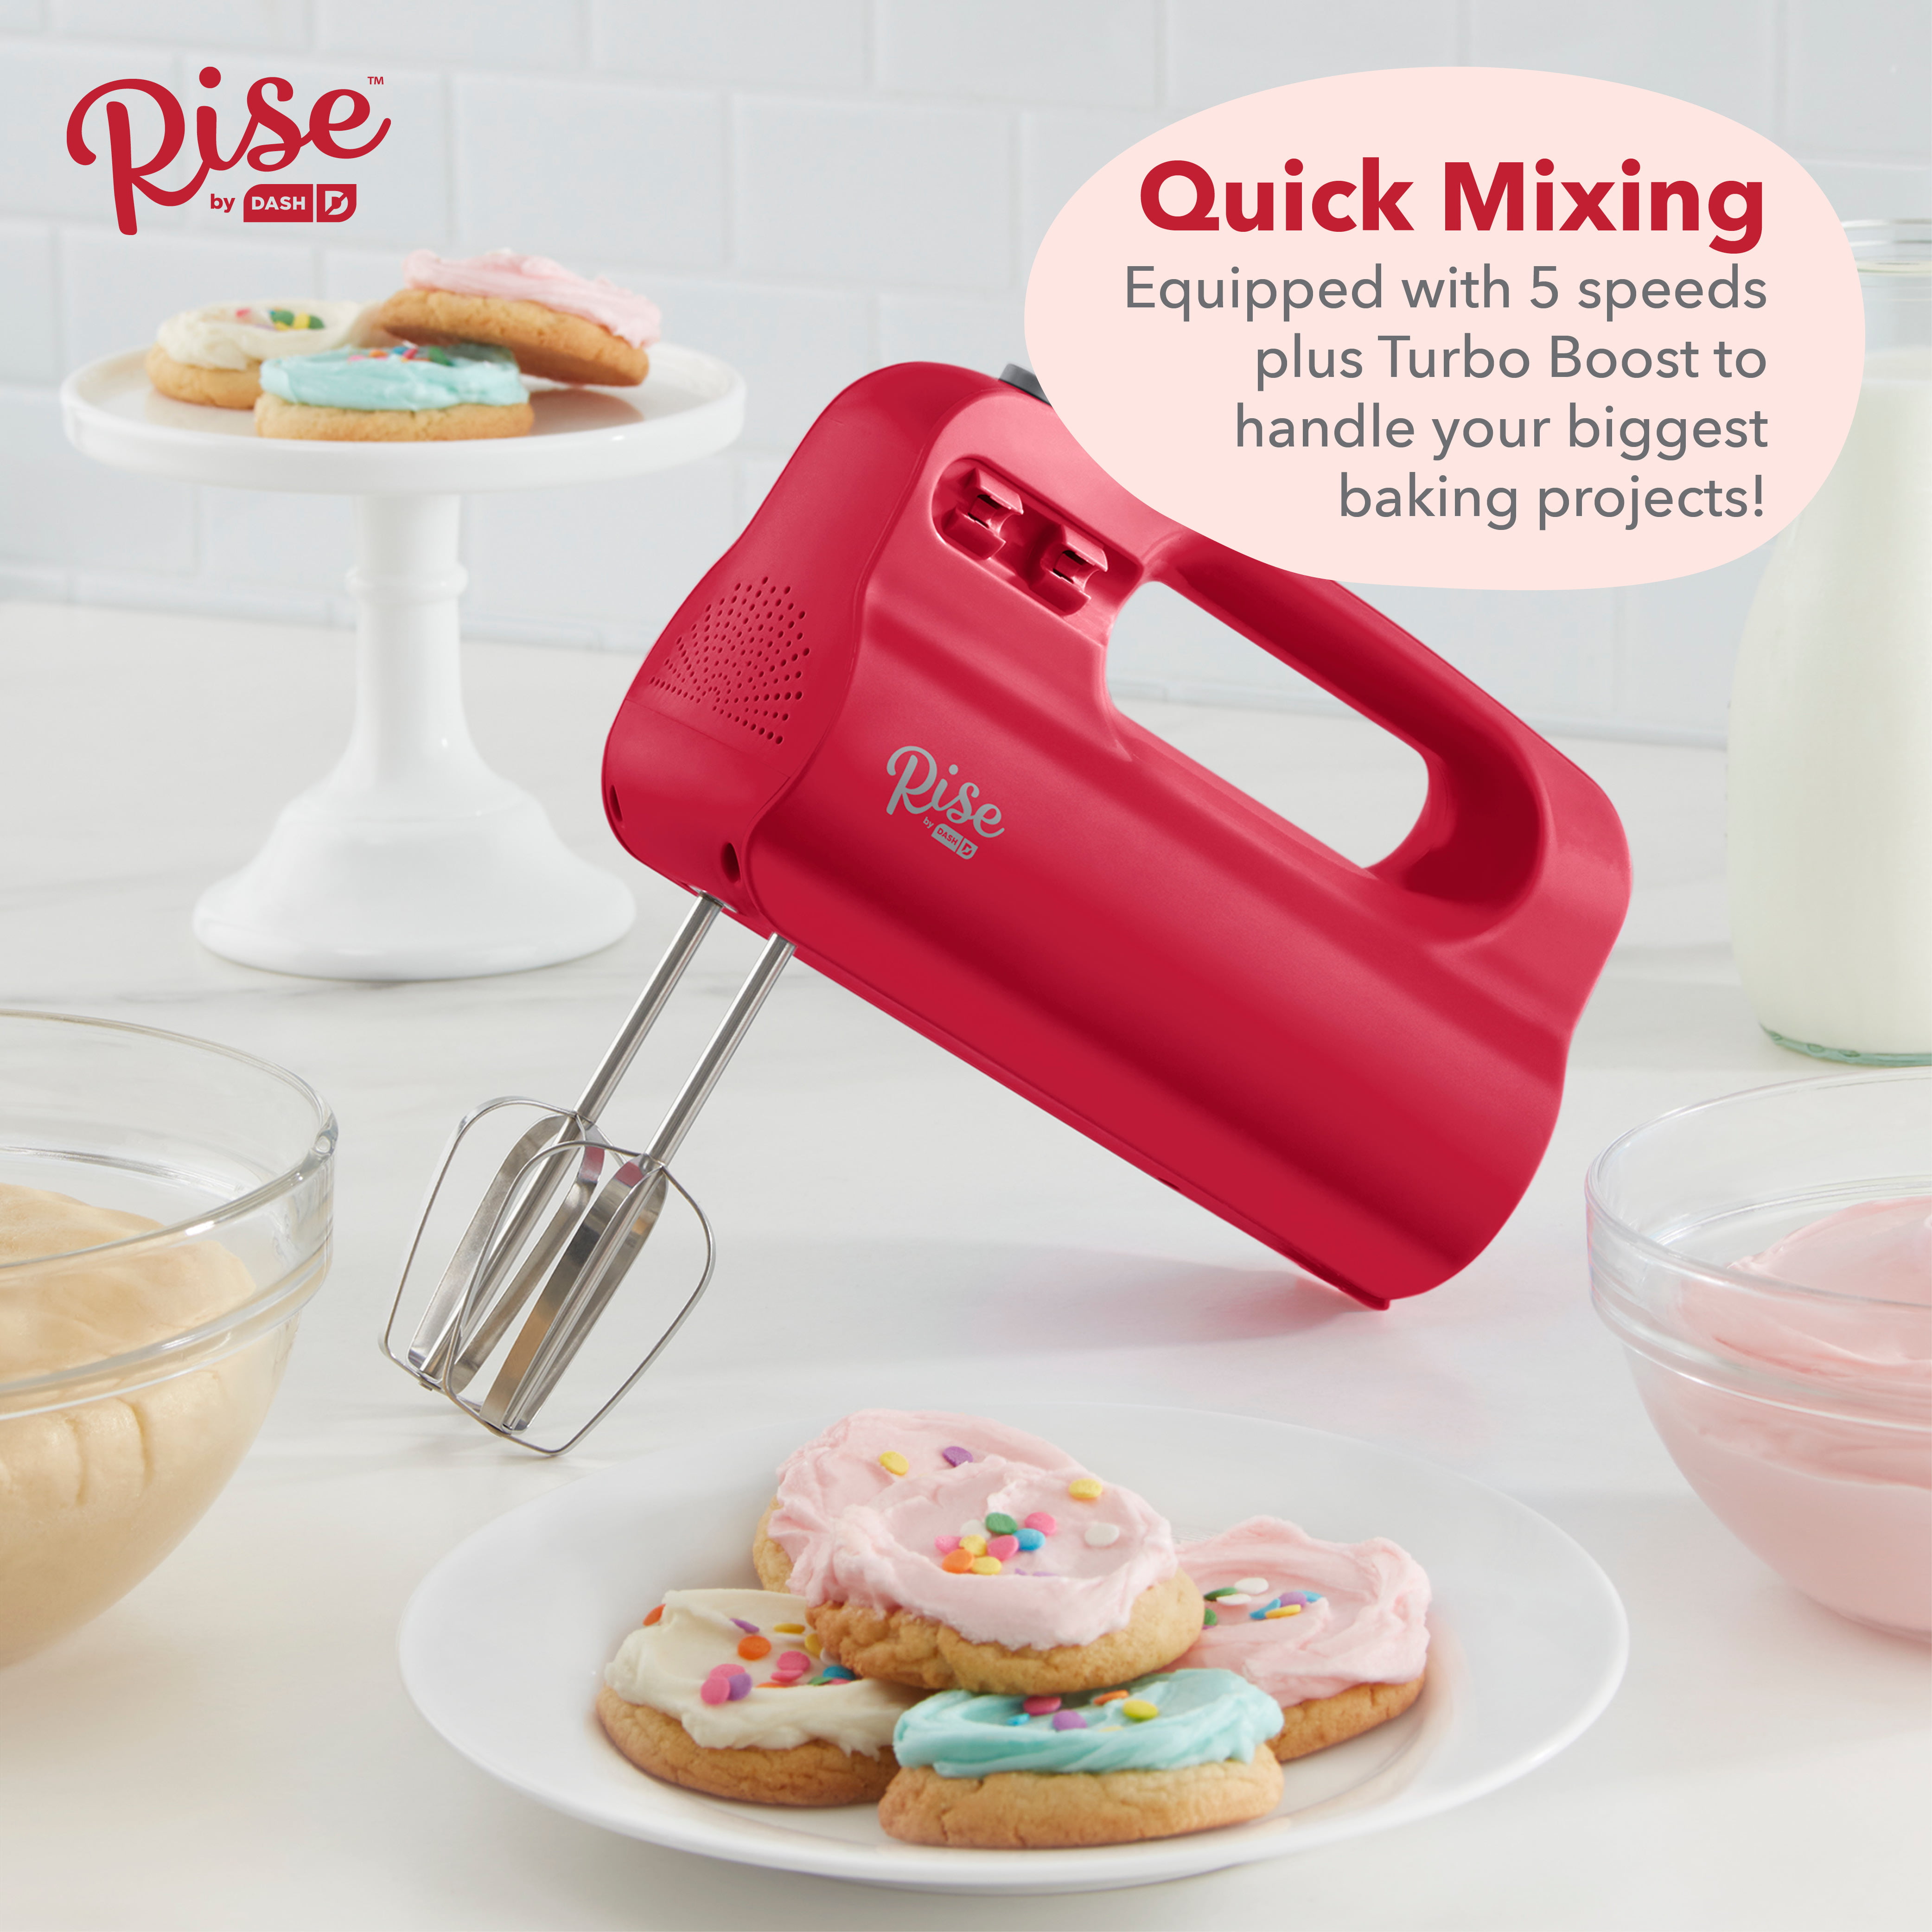  Dash SmartStore™ Deluxe Compact Electric Hand Mixer + Whisk and  Milkshake Attachment for Whipping, Mixing Cookies, Brownies, Cakes, Dough,  Batters, Meringues & More, 3 Speed, 150-Watt – Red: Home & Kitchen